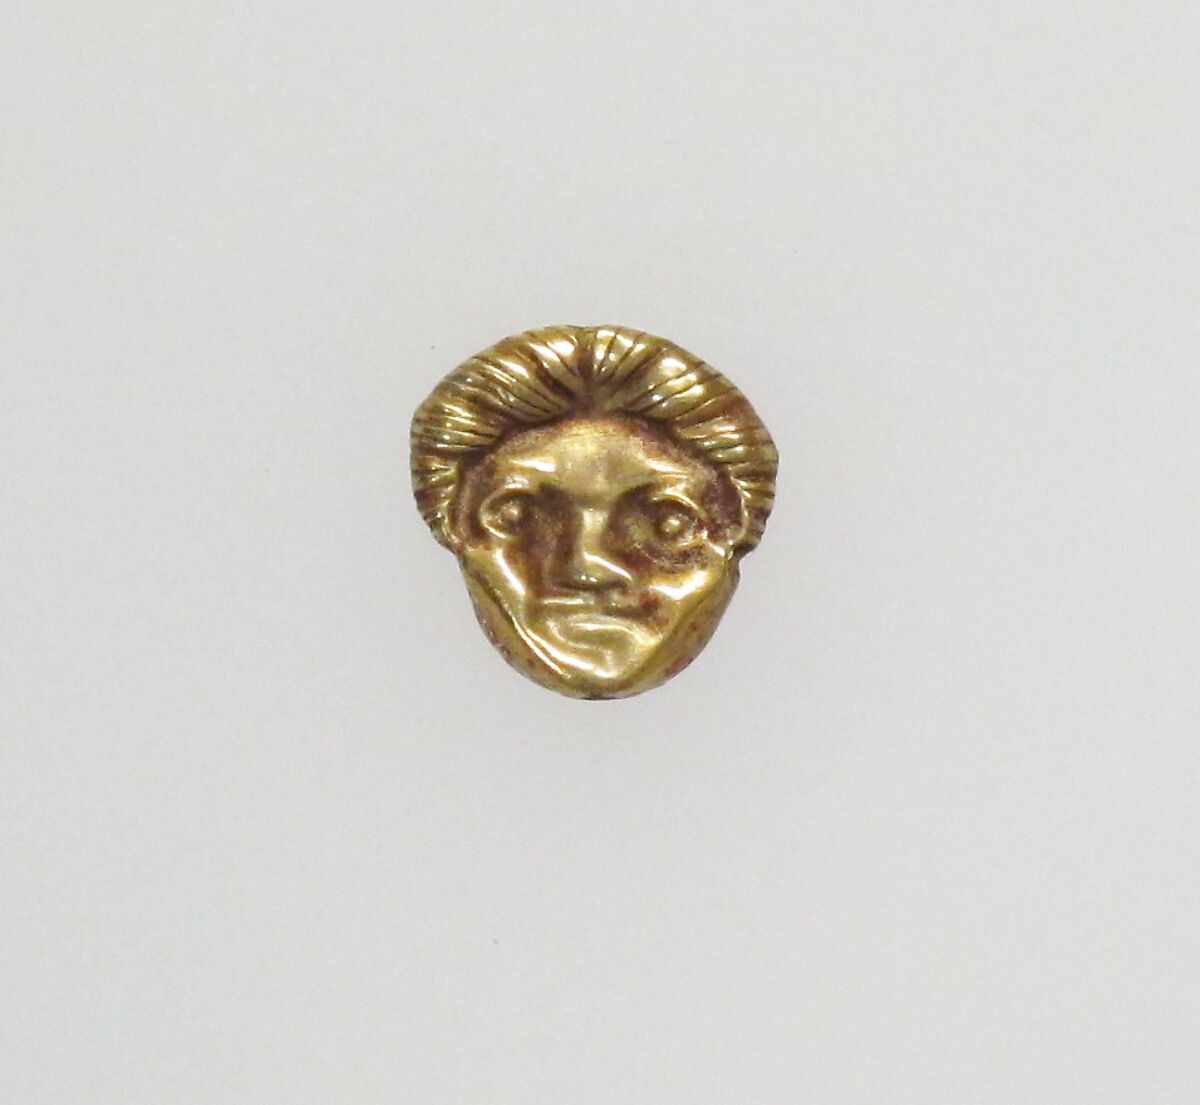 Appliqué in the form of a head, Gold, Greek 